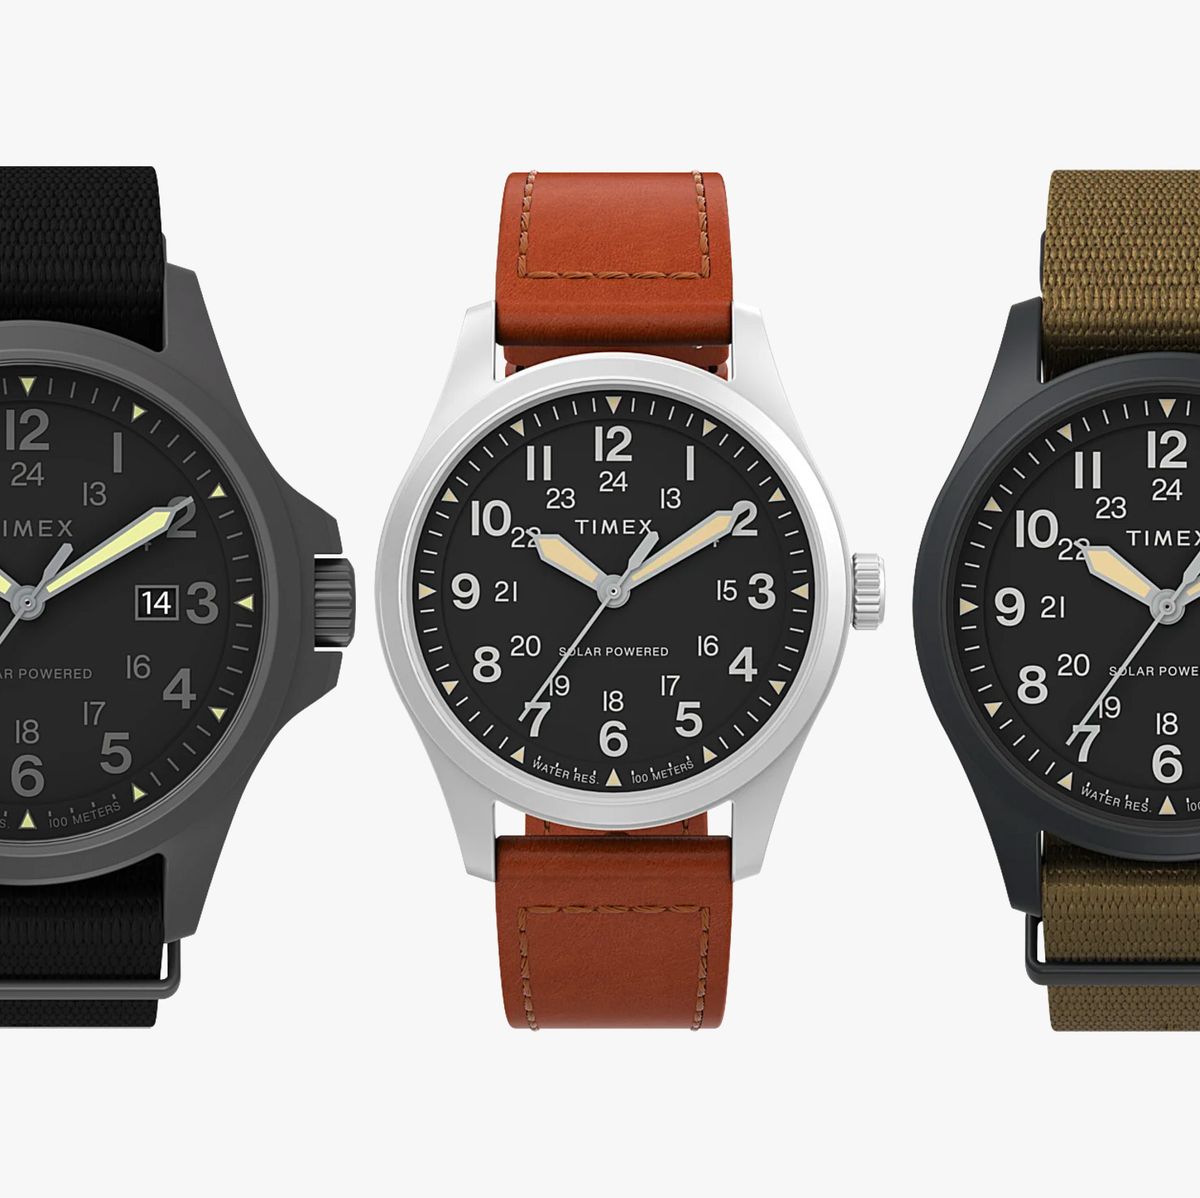 Your Next Watch Should Be a Solar-Powered Timex